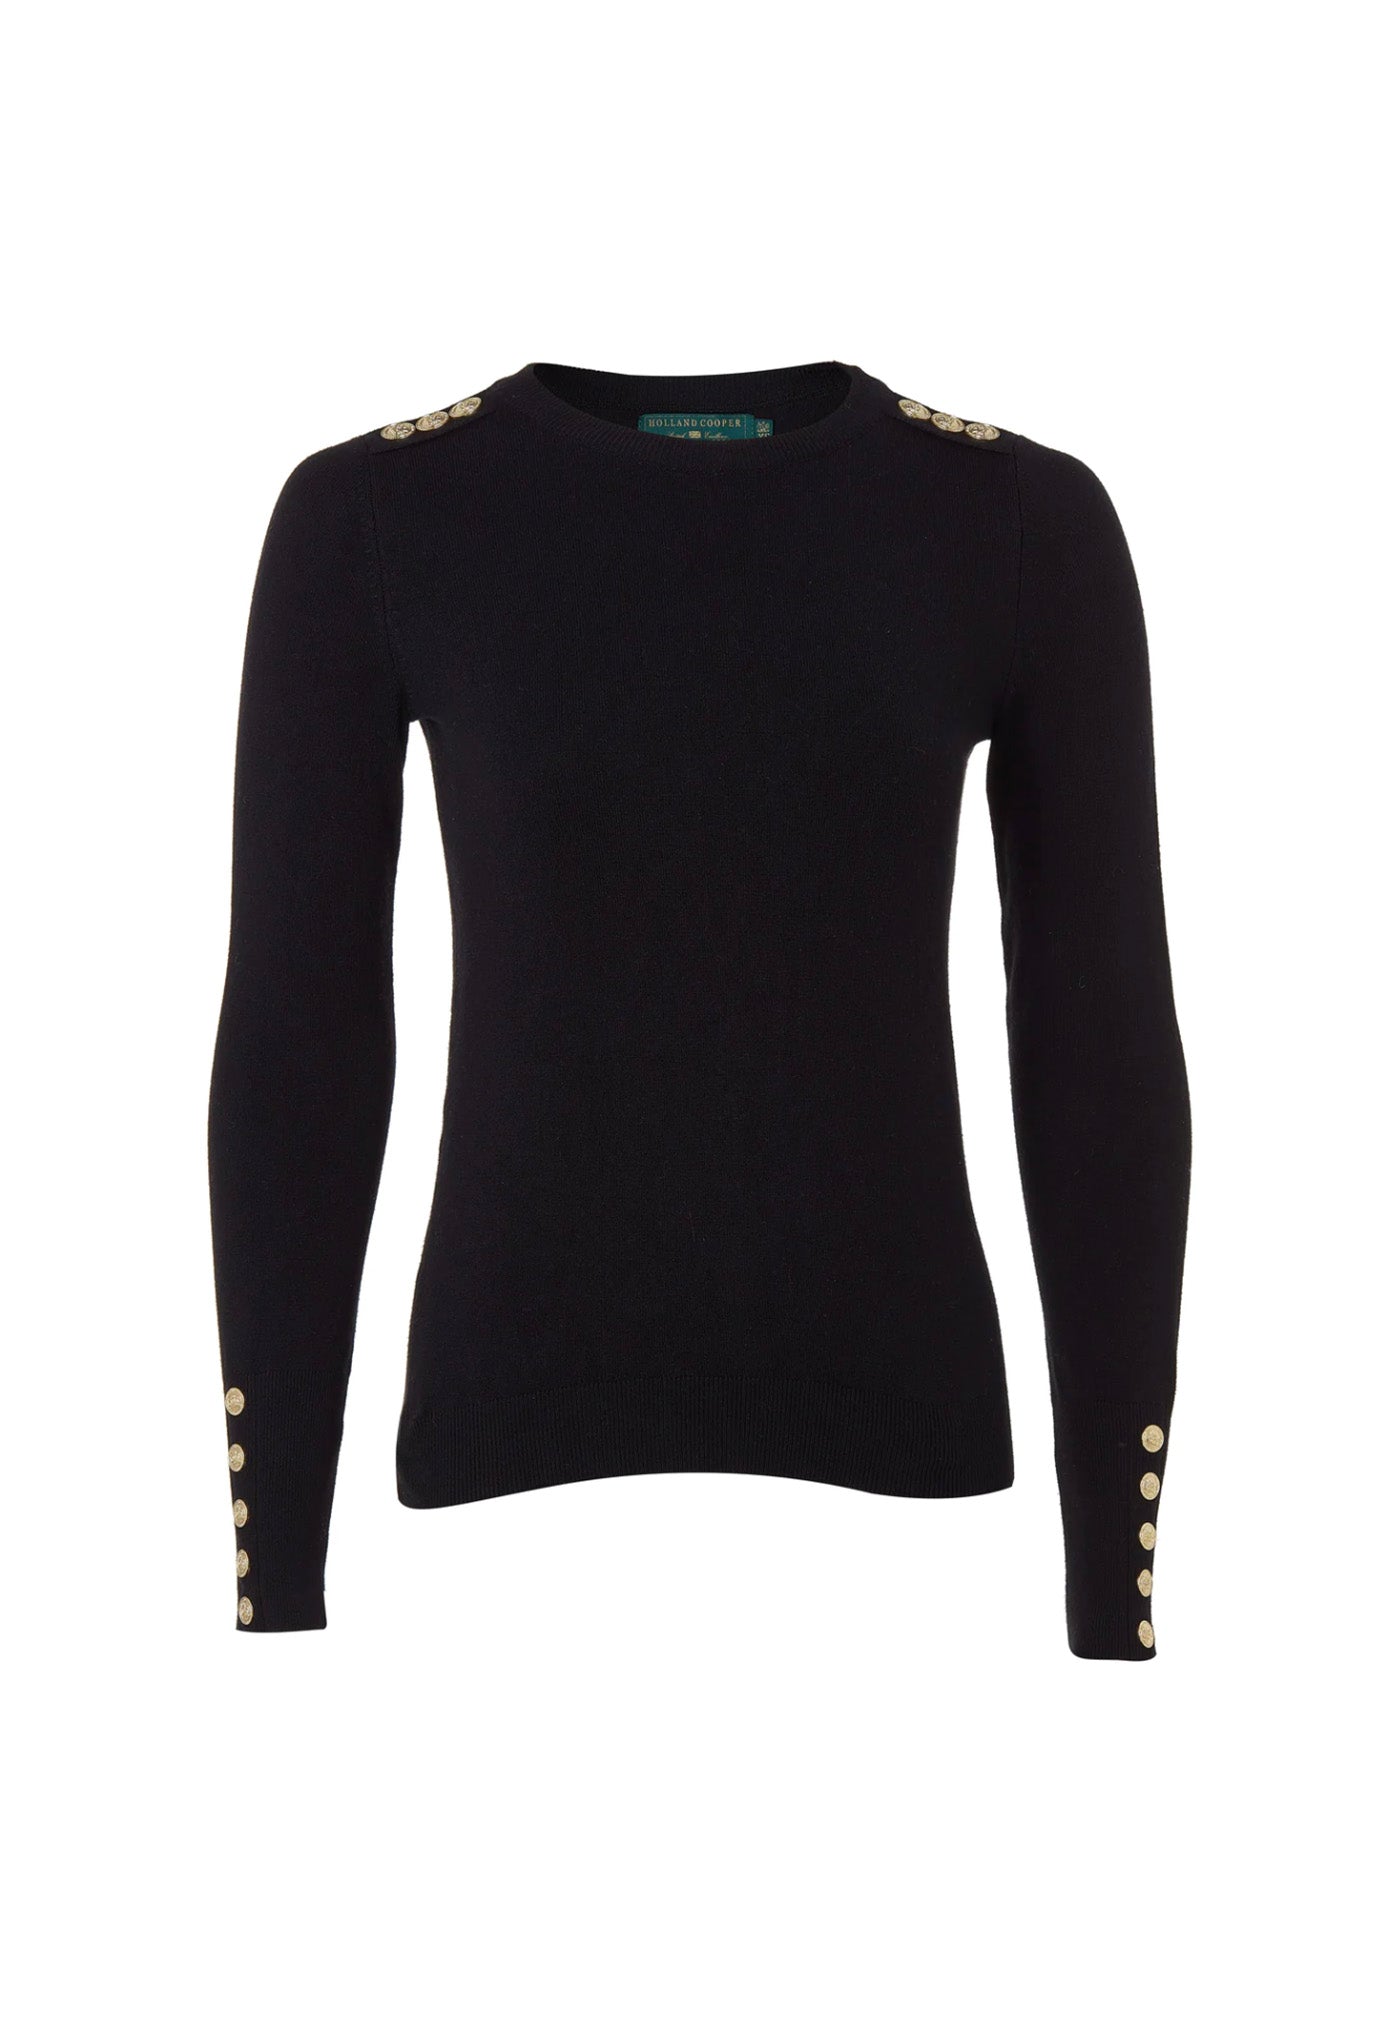 Buttoned Knit Crew Neck - Black sold by Angel Divine